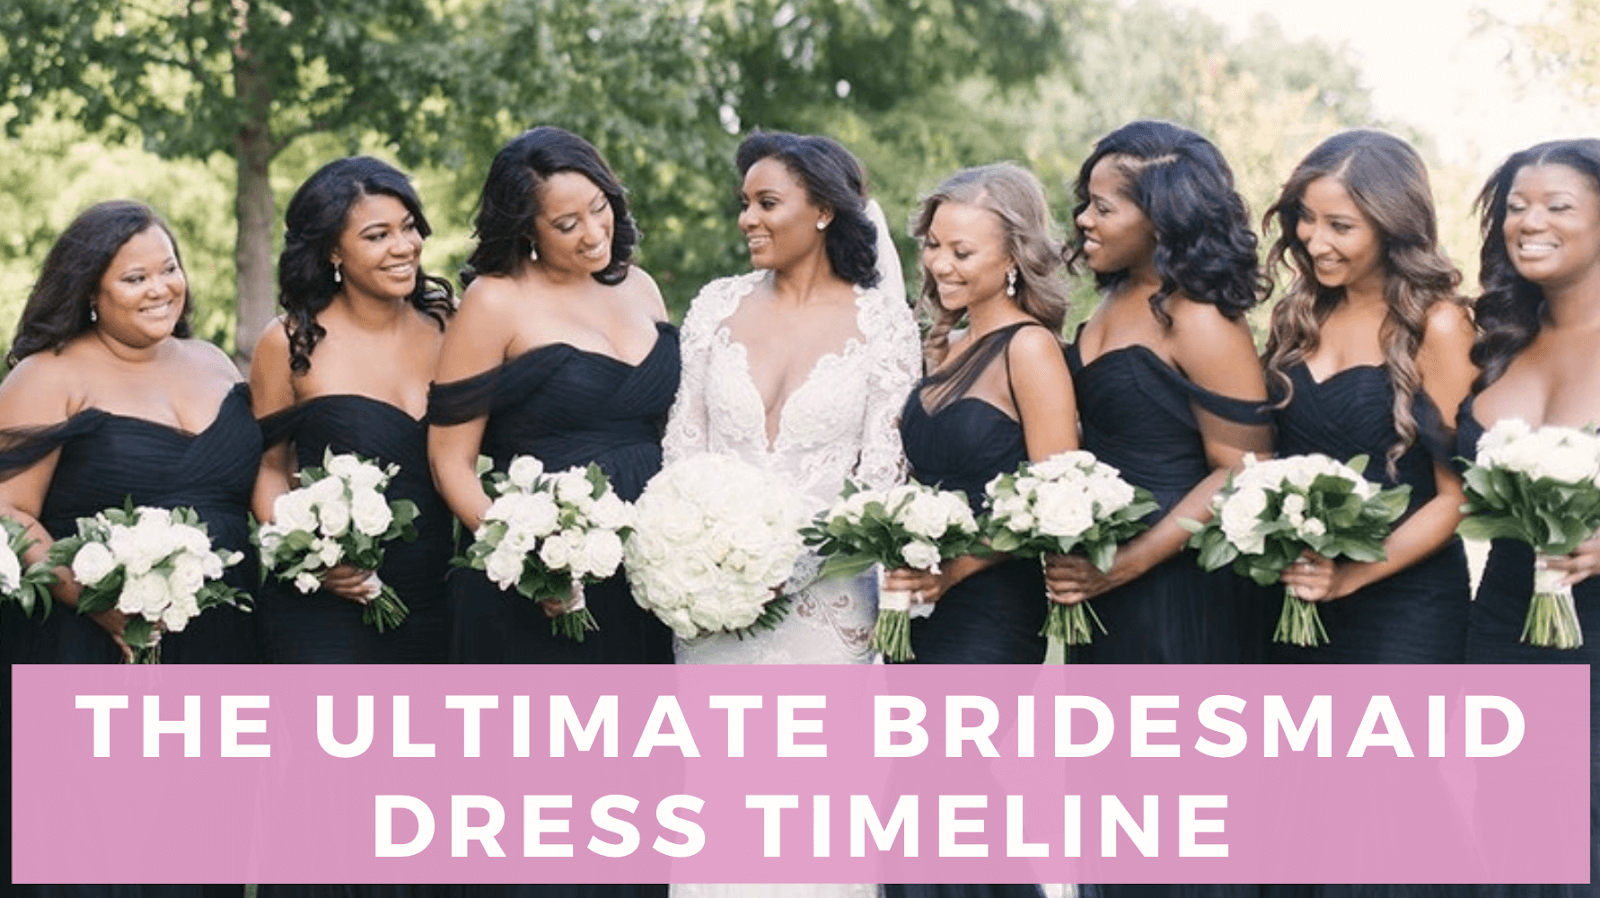 Planning the Best Bridal Party Experience